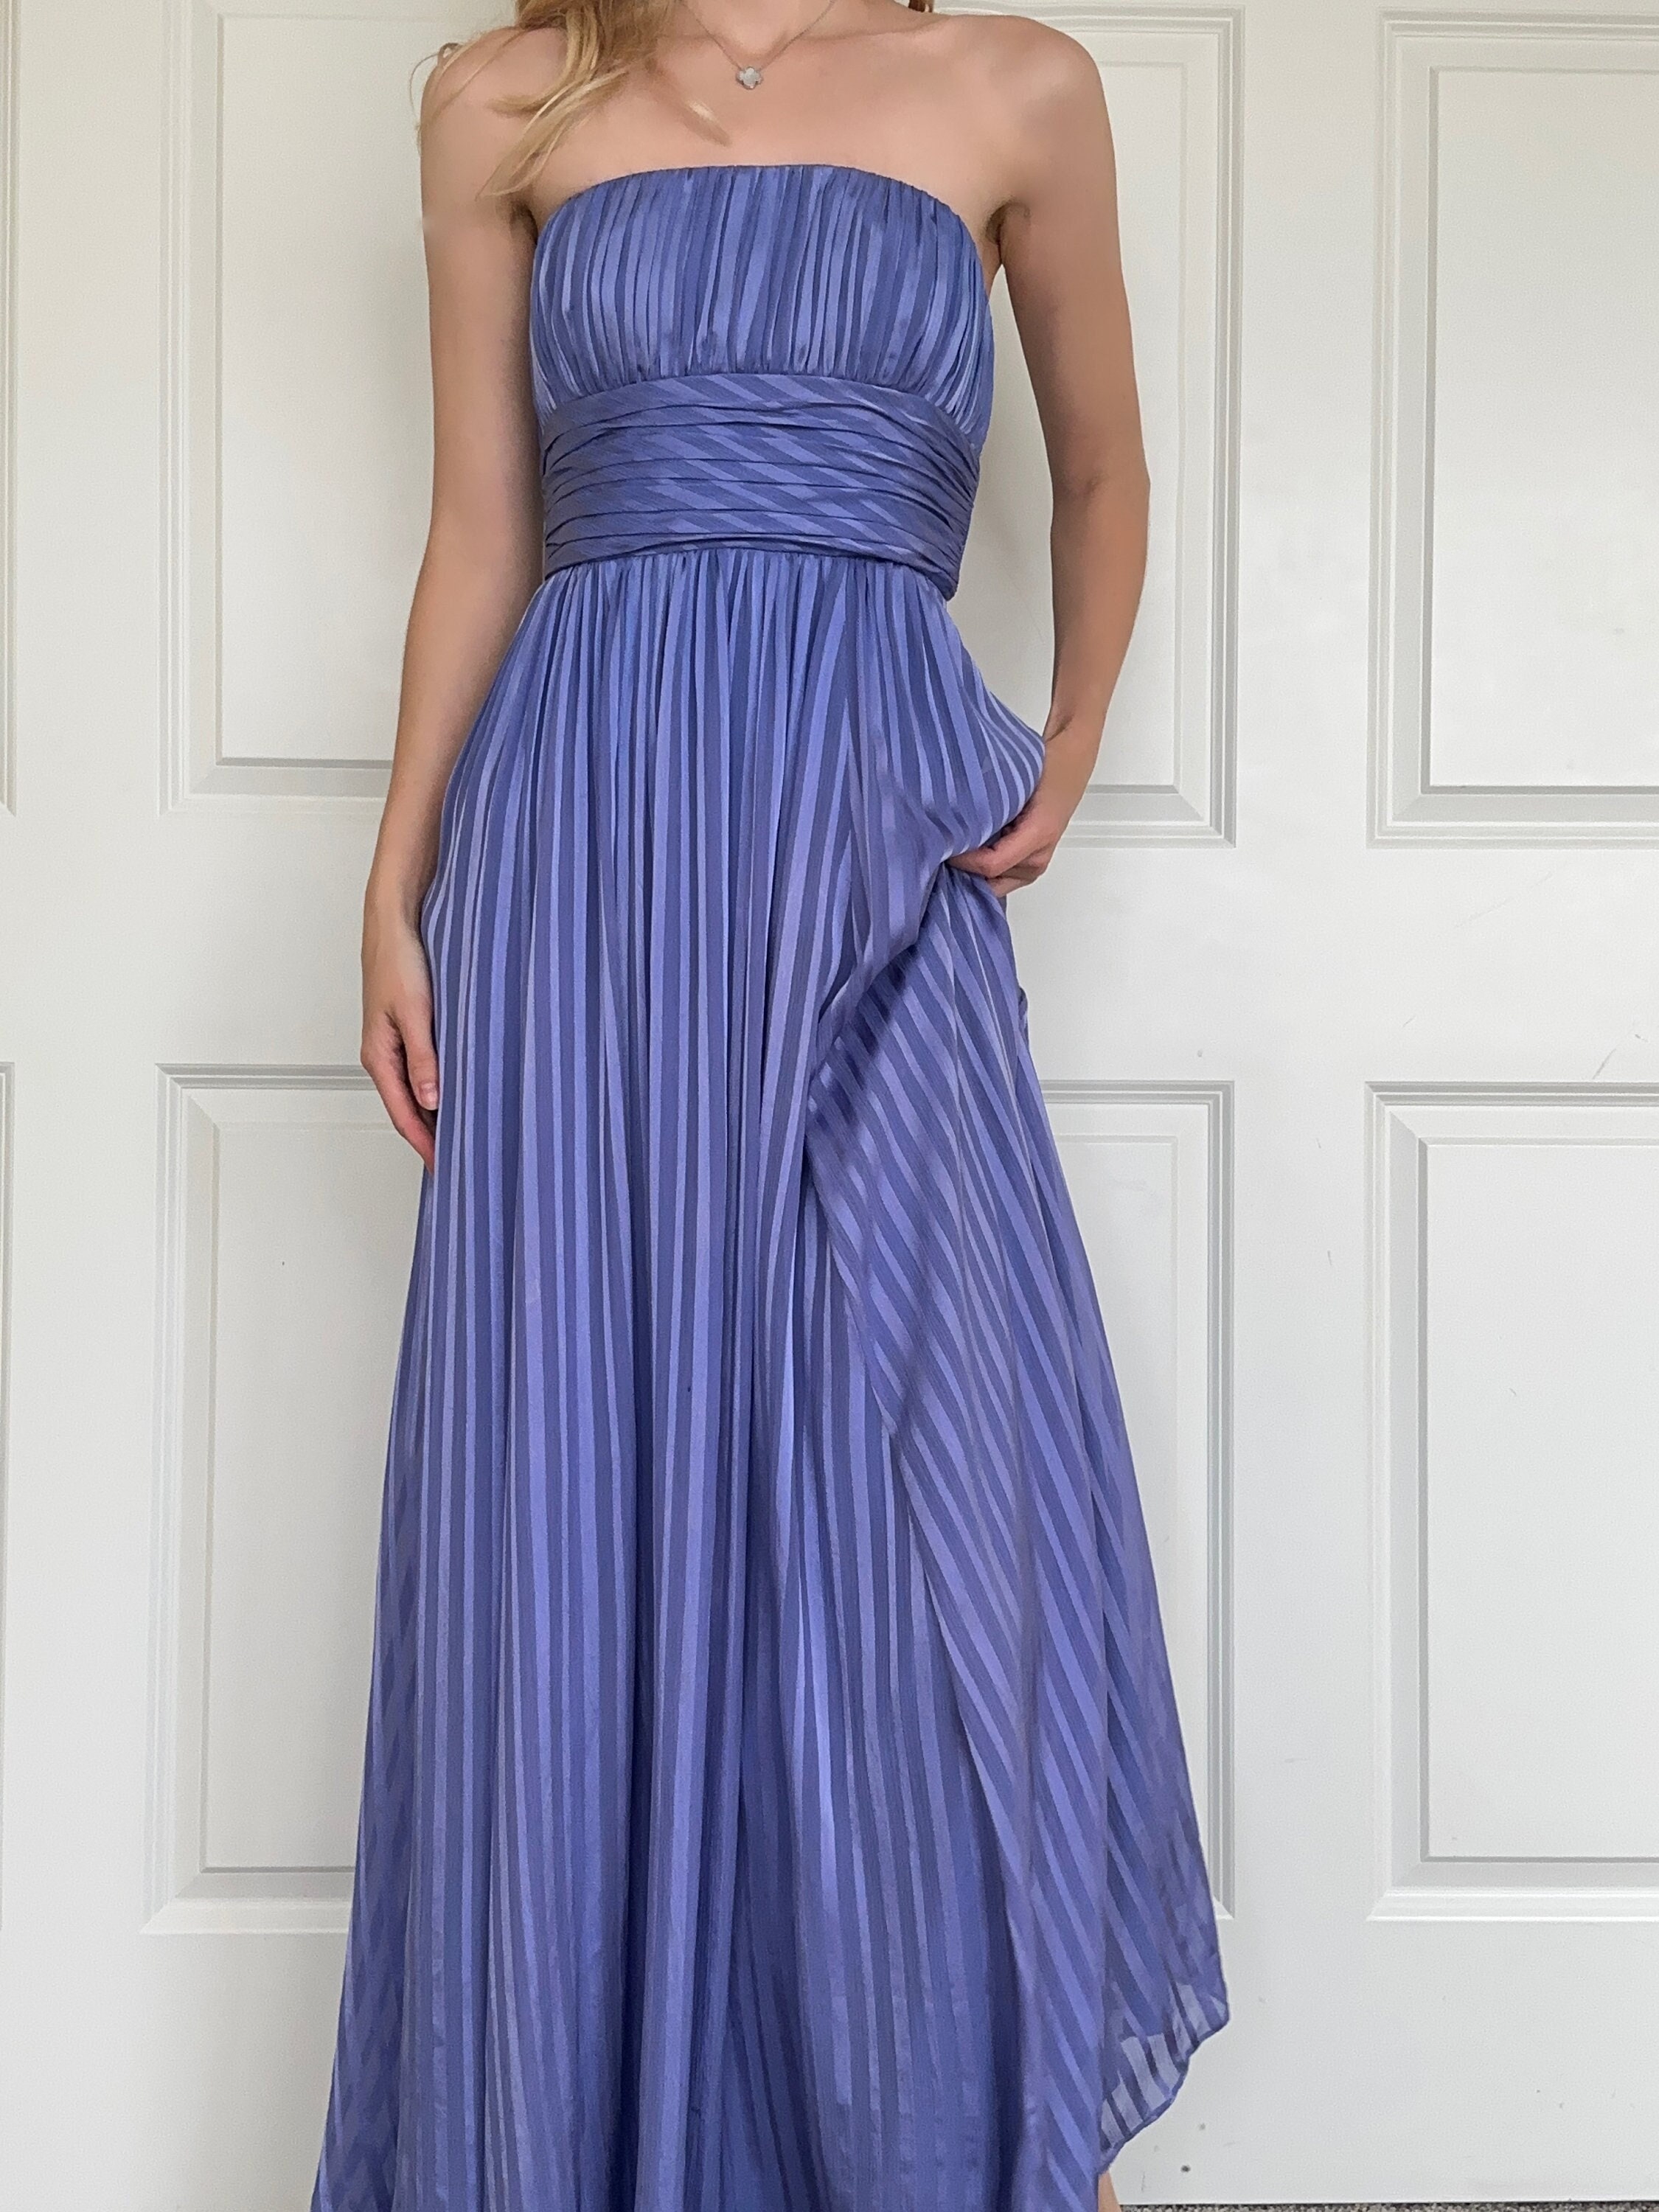 Lila Labor Postpartum Gown in Periwinkle Blue